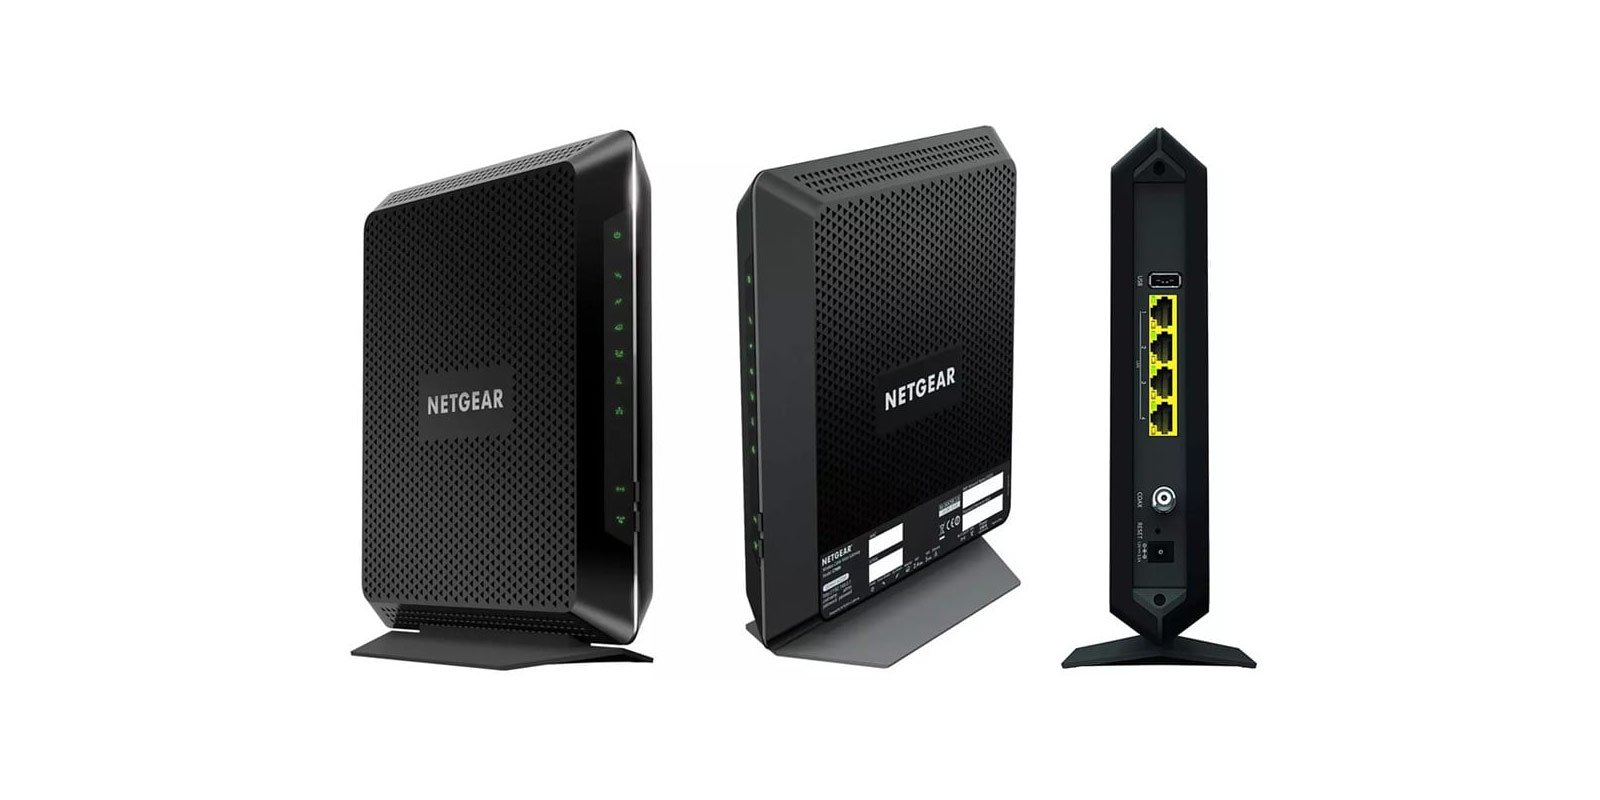 modem and router combo for spectrum